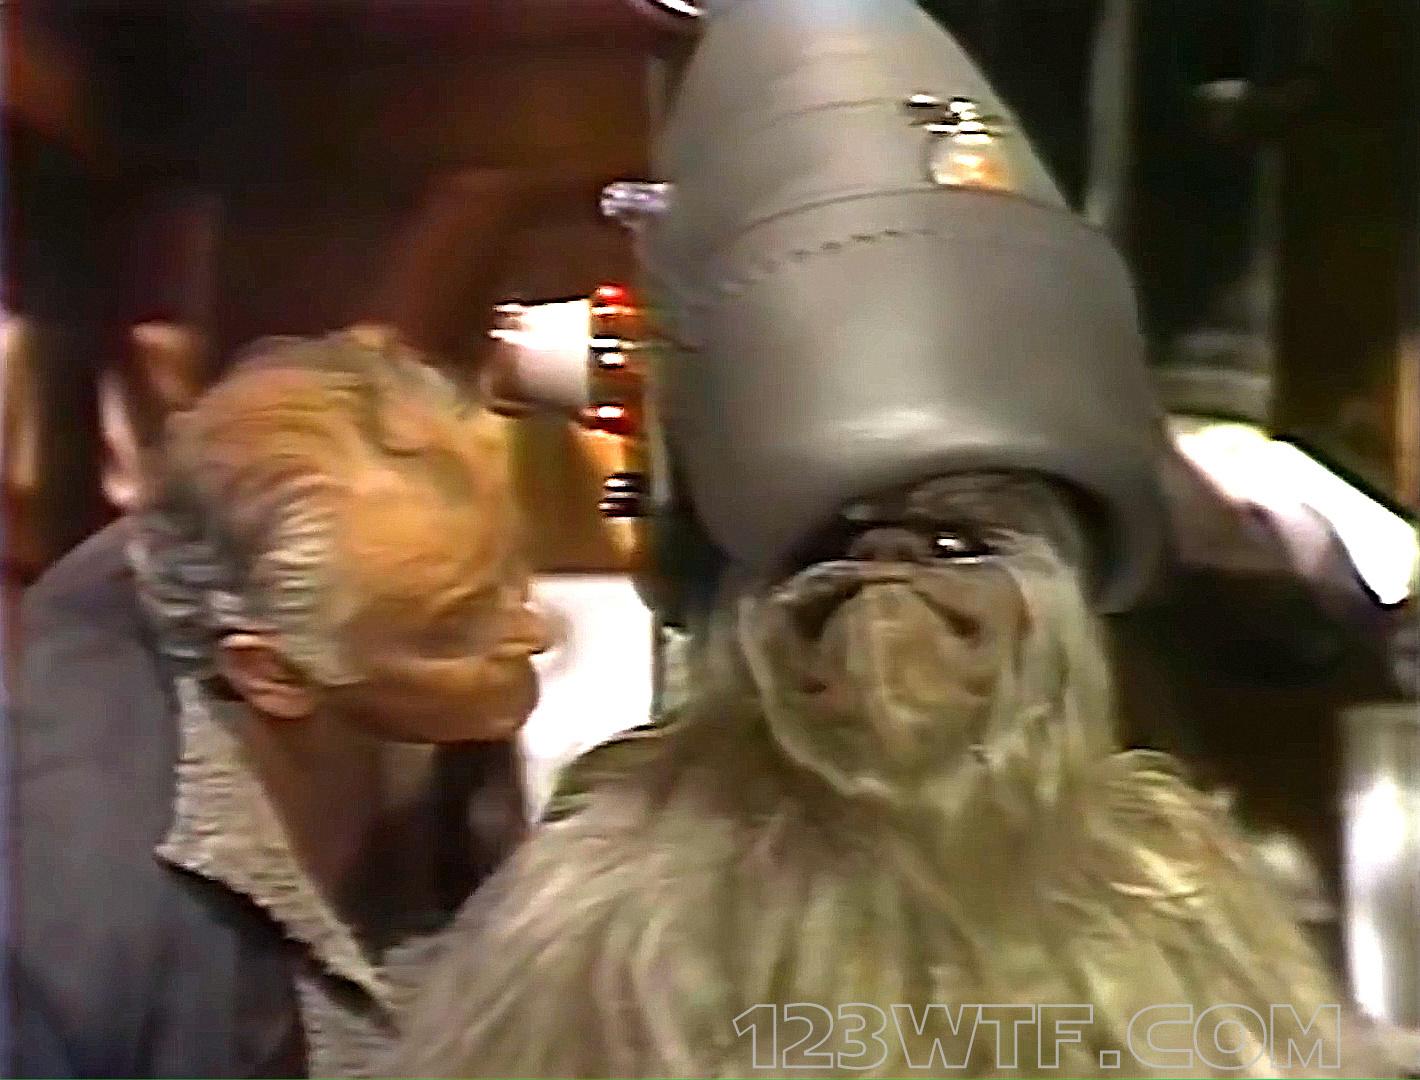 star-wars-holiday-special-13-sc-vr-very-ridiculous-helmet-123wtf-saint-pauly